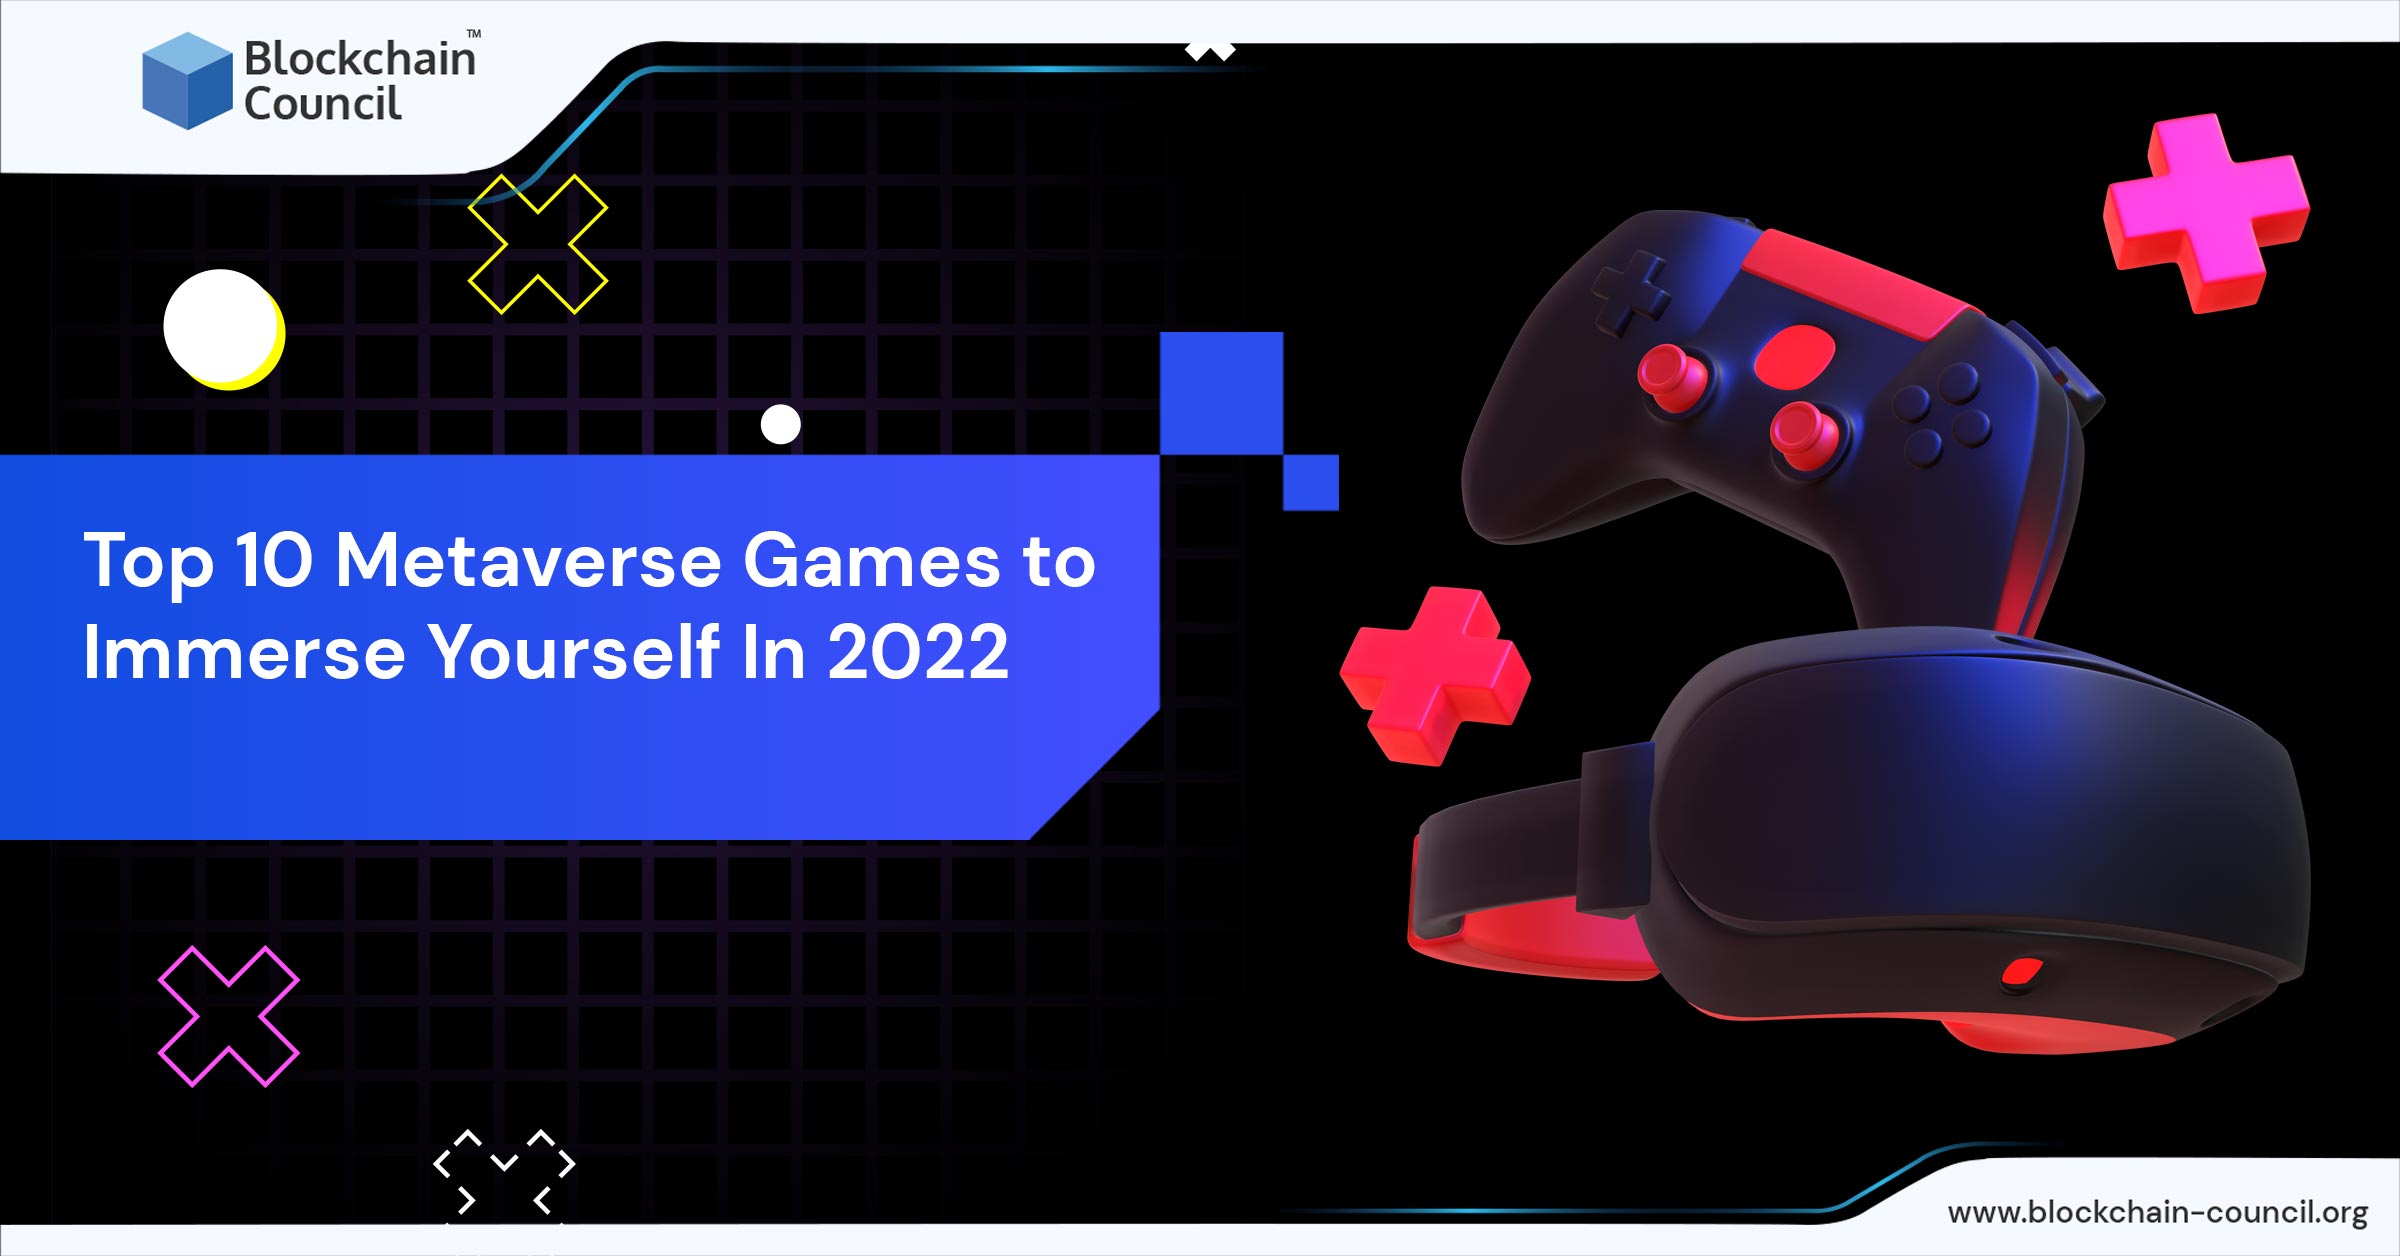 Top 10 Metaverse Games to Immerse Yourself In 2022